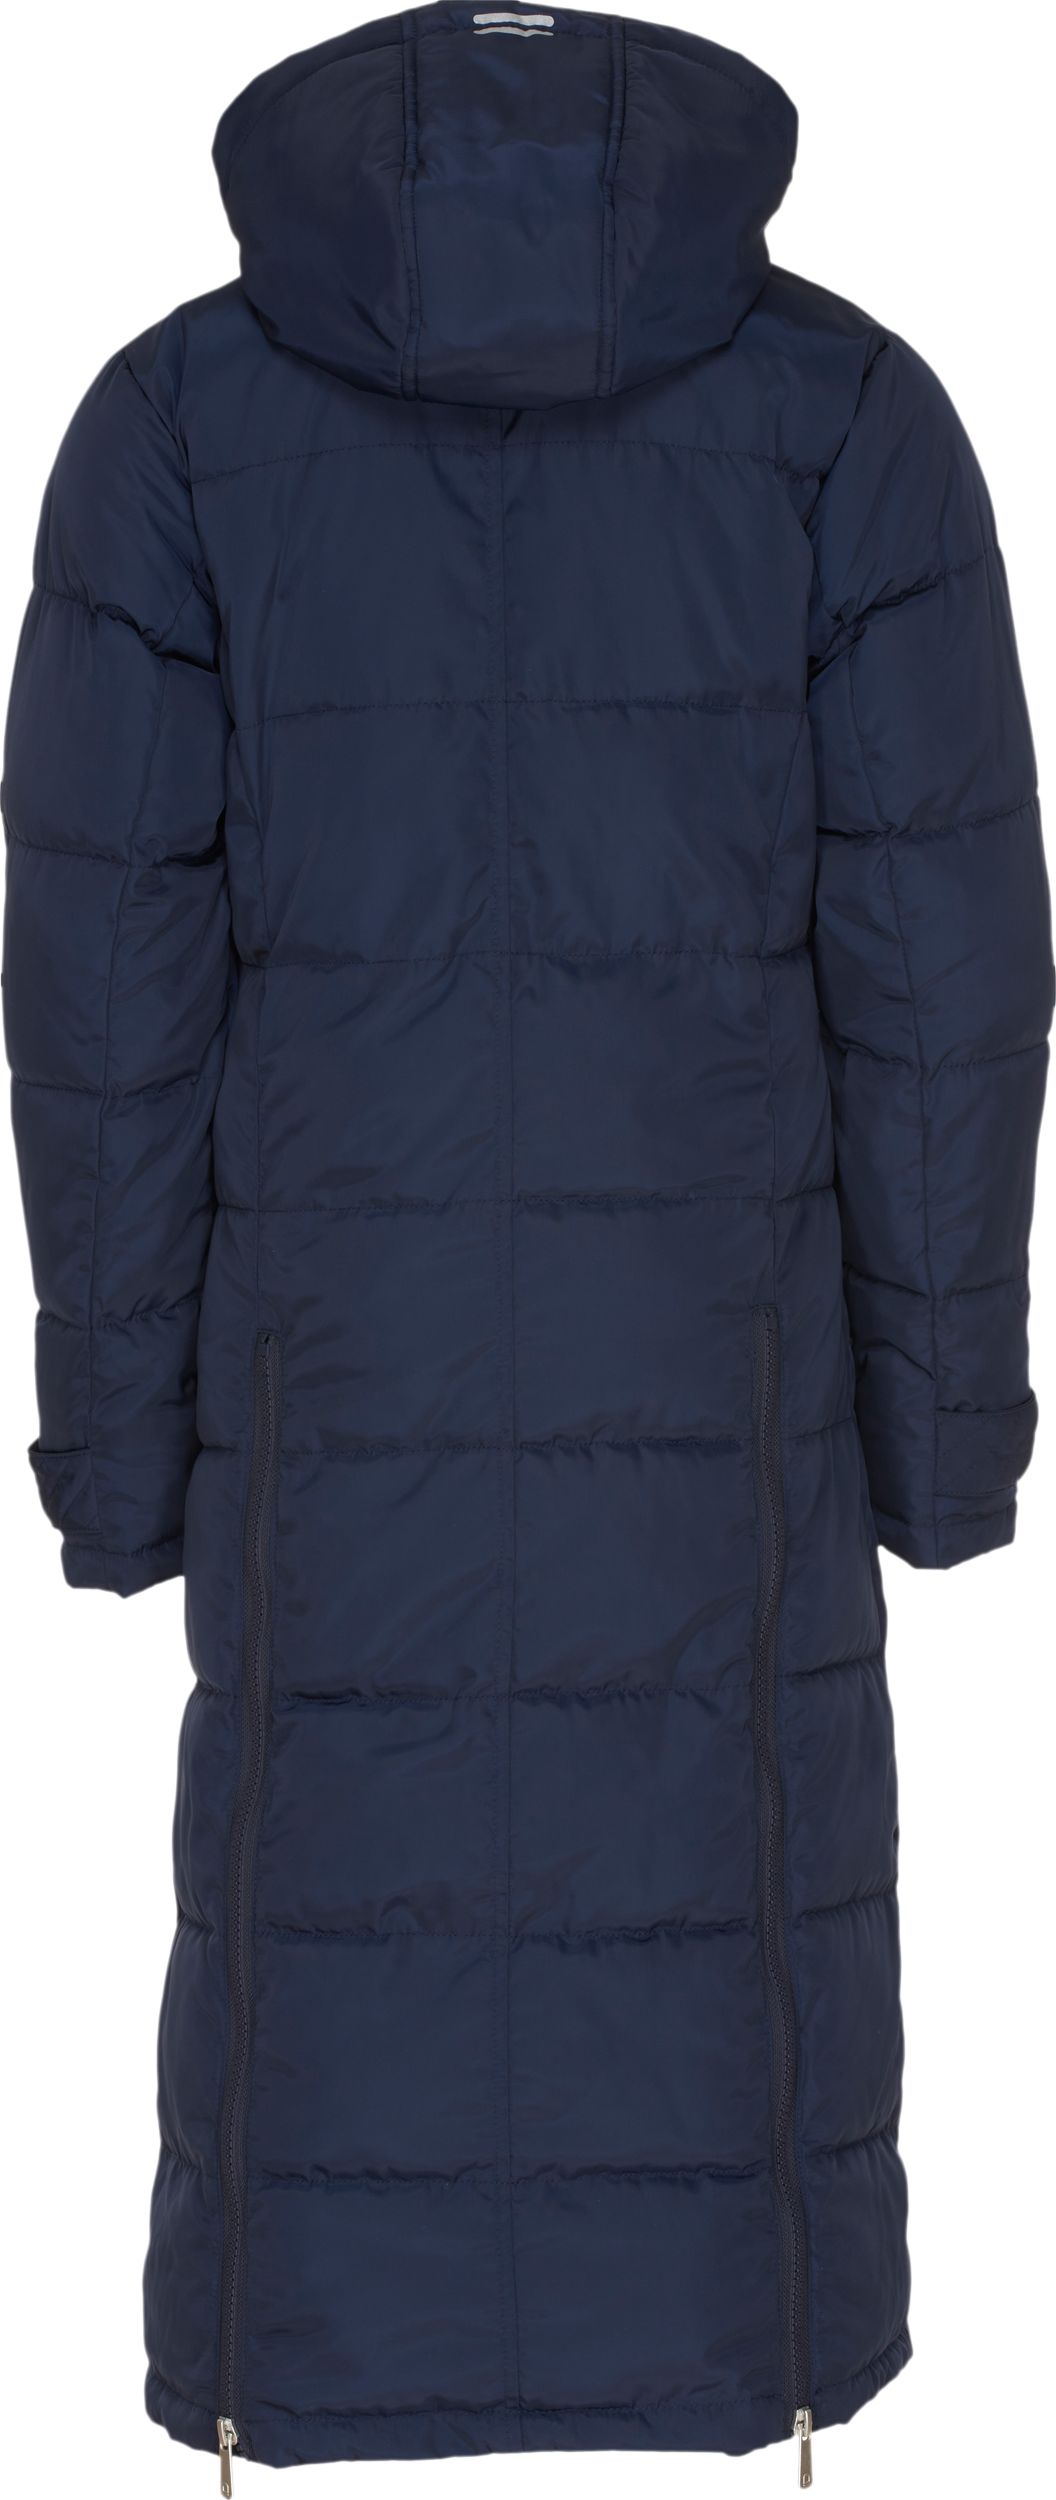 EQUIPAGE, CANDICE LONG JACKET JR